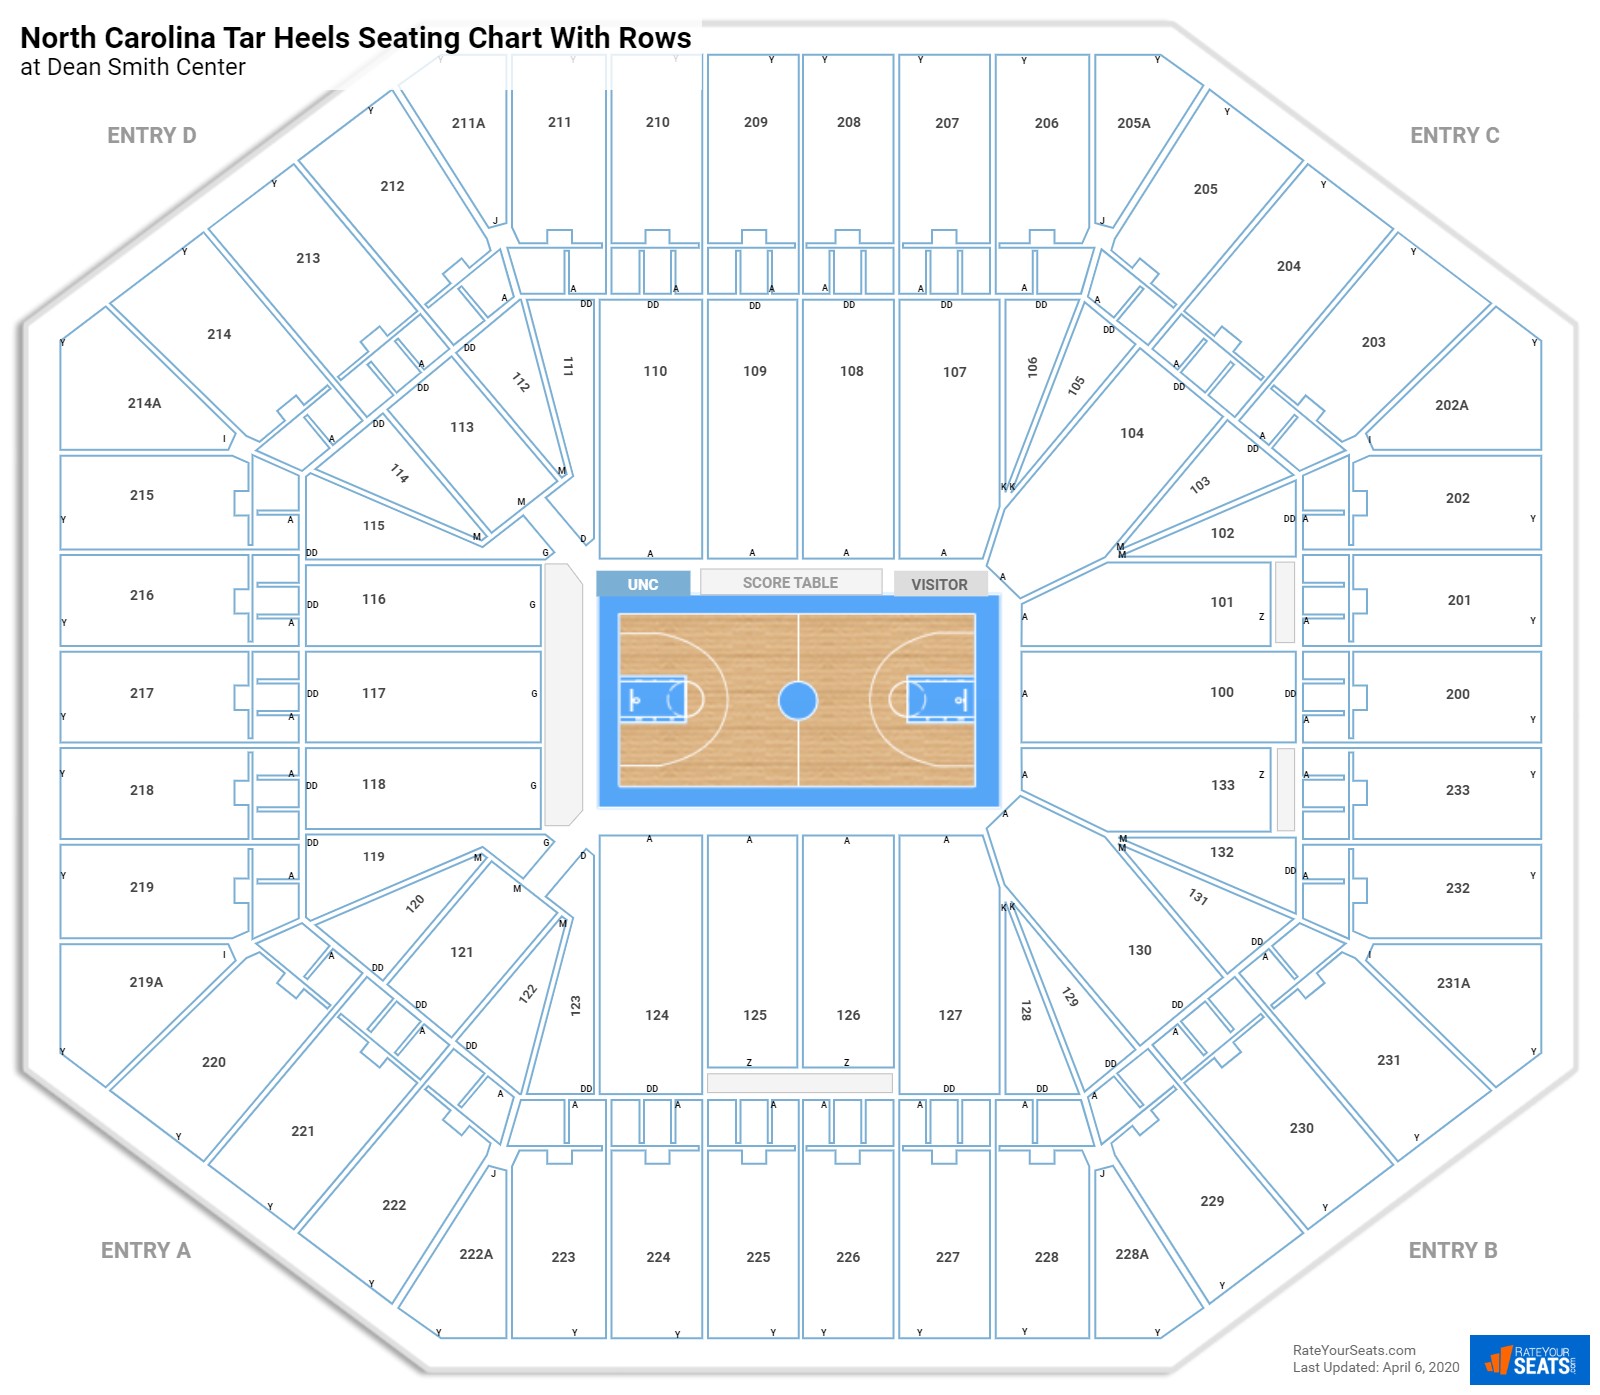 Dean Smith Center seating chart with row numbers